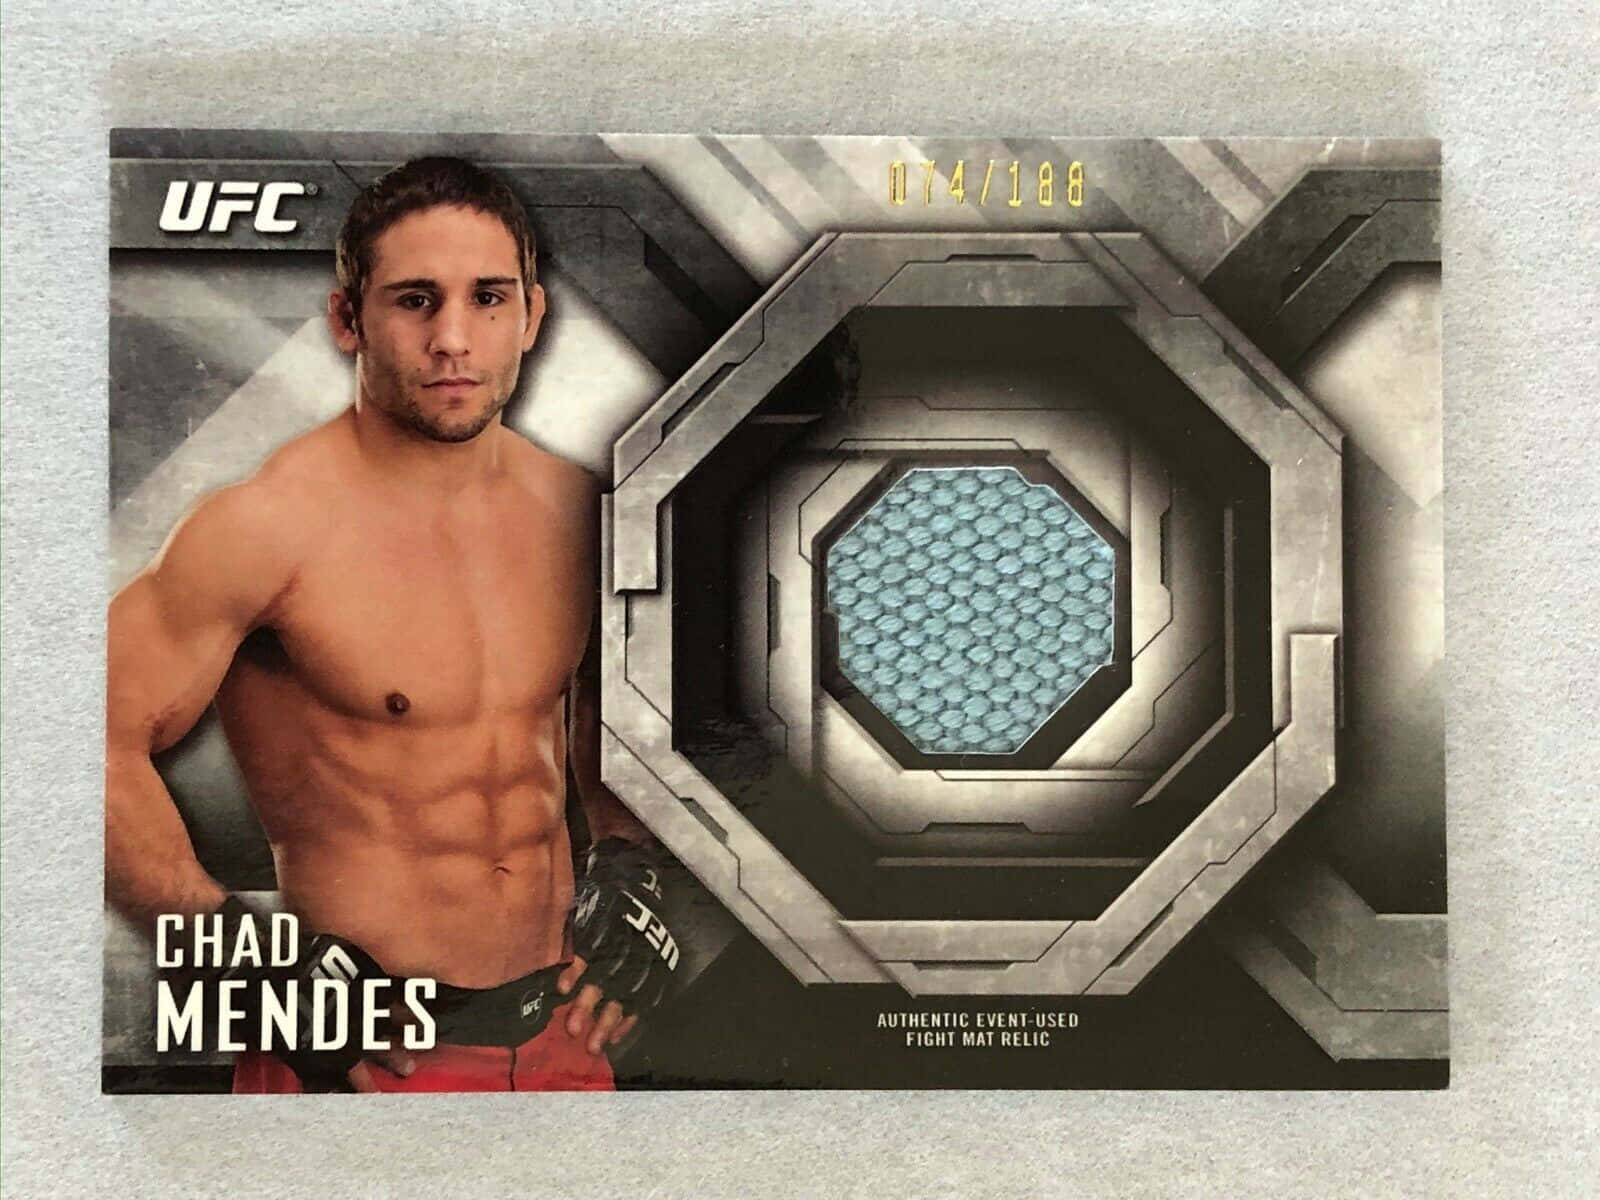 Chad Mendes Ufc - Mma Cards Wallpaper